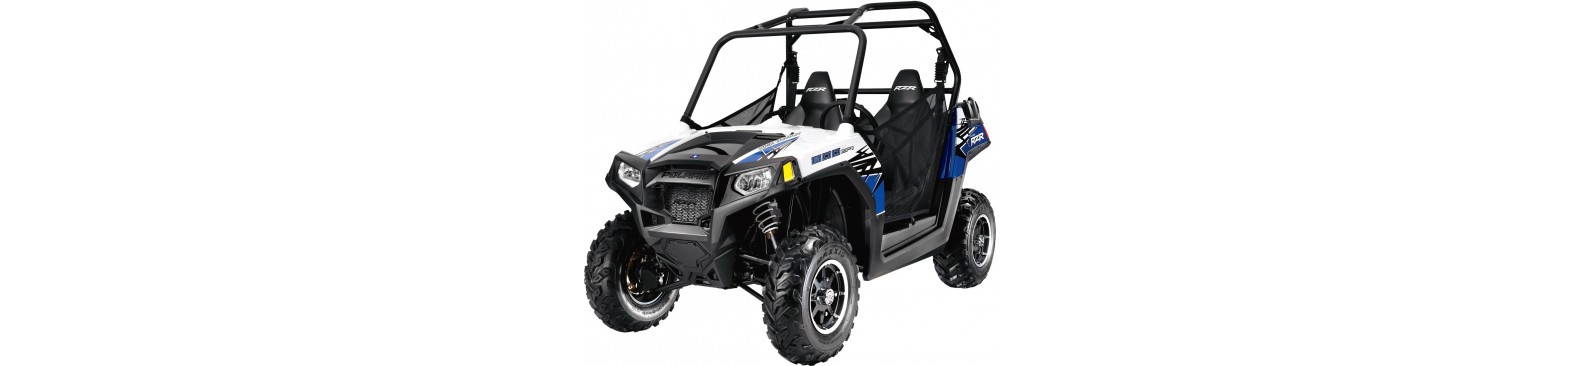 Polaris RZR 800, 800s, 2 seat and 4 seat replacement and performance parts